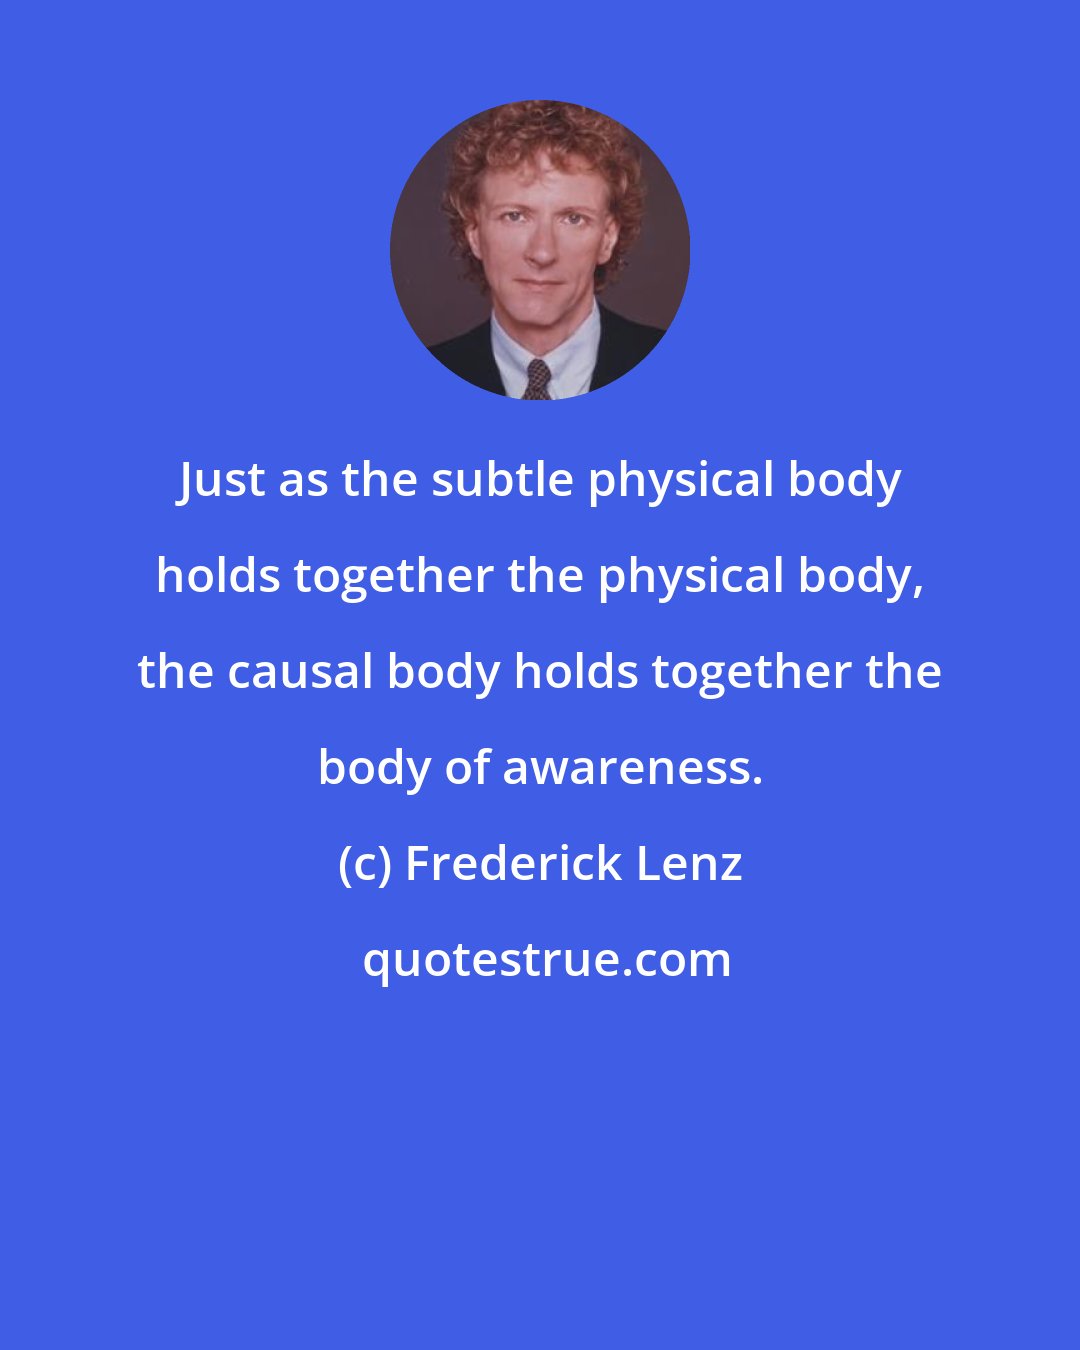 Frederick Lenz: Just as the subtle physical body holds together the physical body, the causal body holds together the body of awareness.